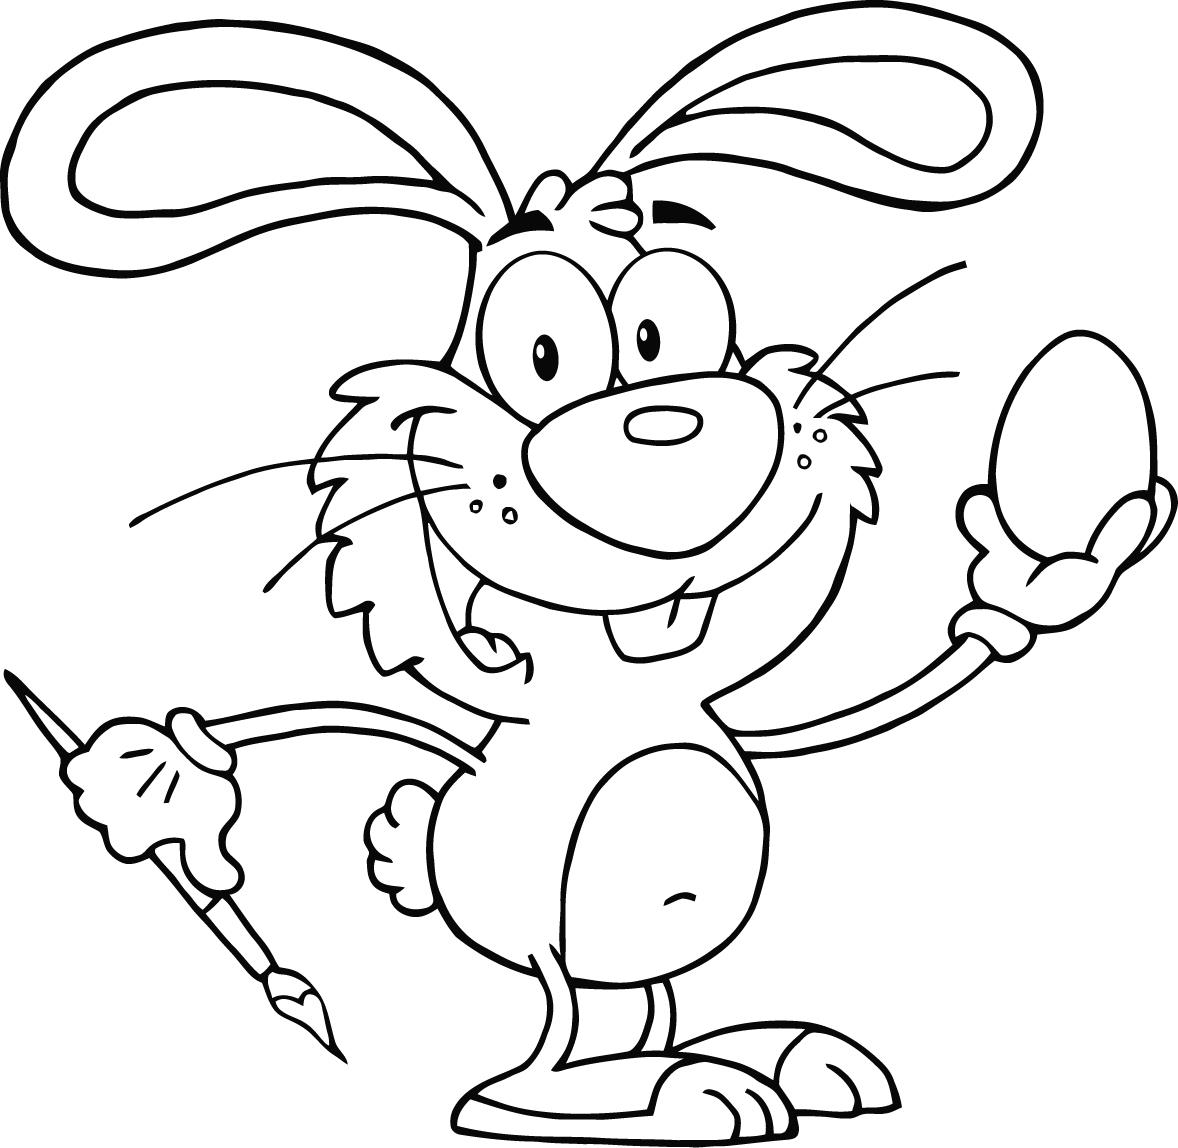 Bunny Coloring Pages Best Coloring Pages For Kids Effy Moom Free Coloring Picture wallpaper give a chance to color on the wall without getting in trouble! Fill the walls of your home or office with stress-relieving [effymoom.blogspot.com]